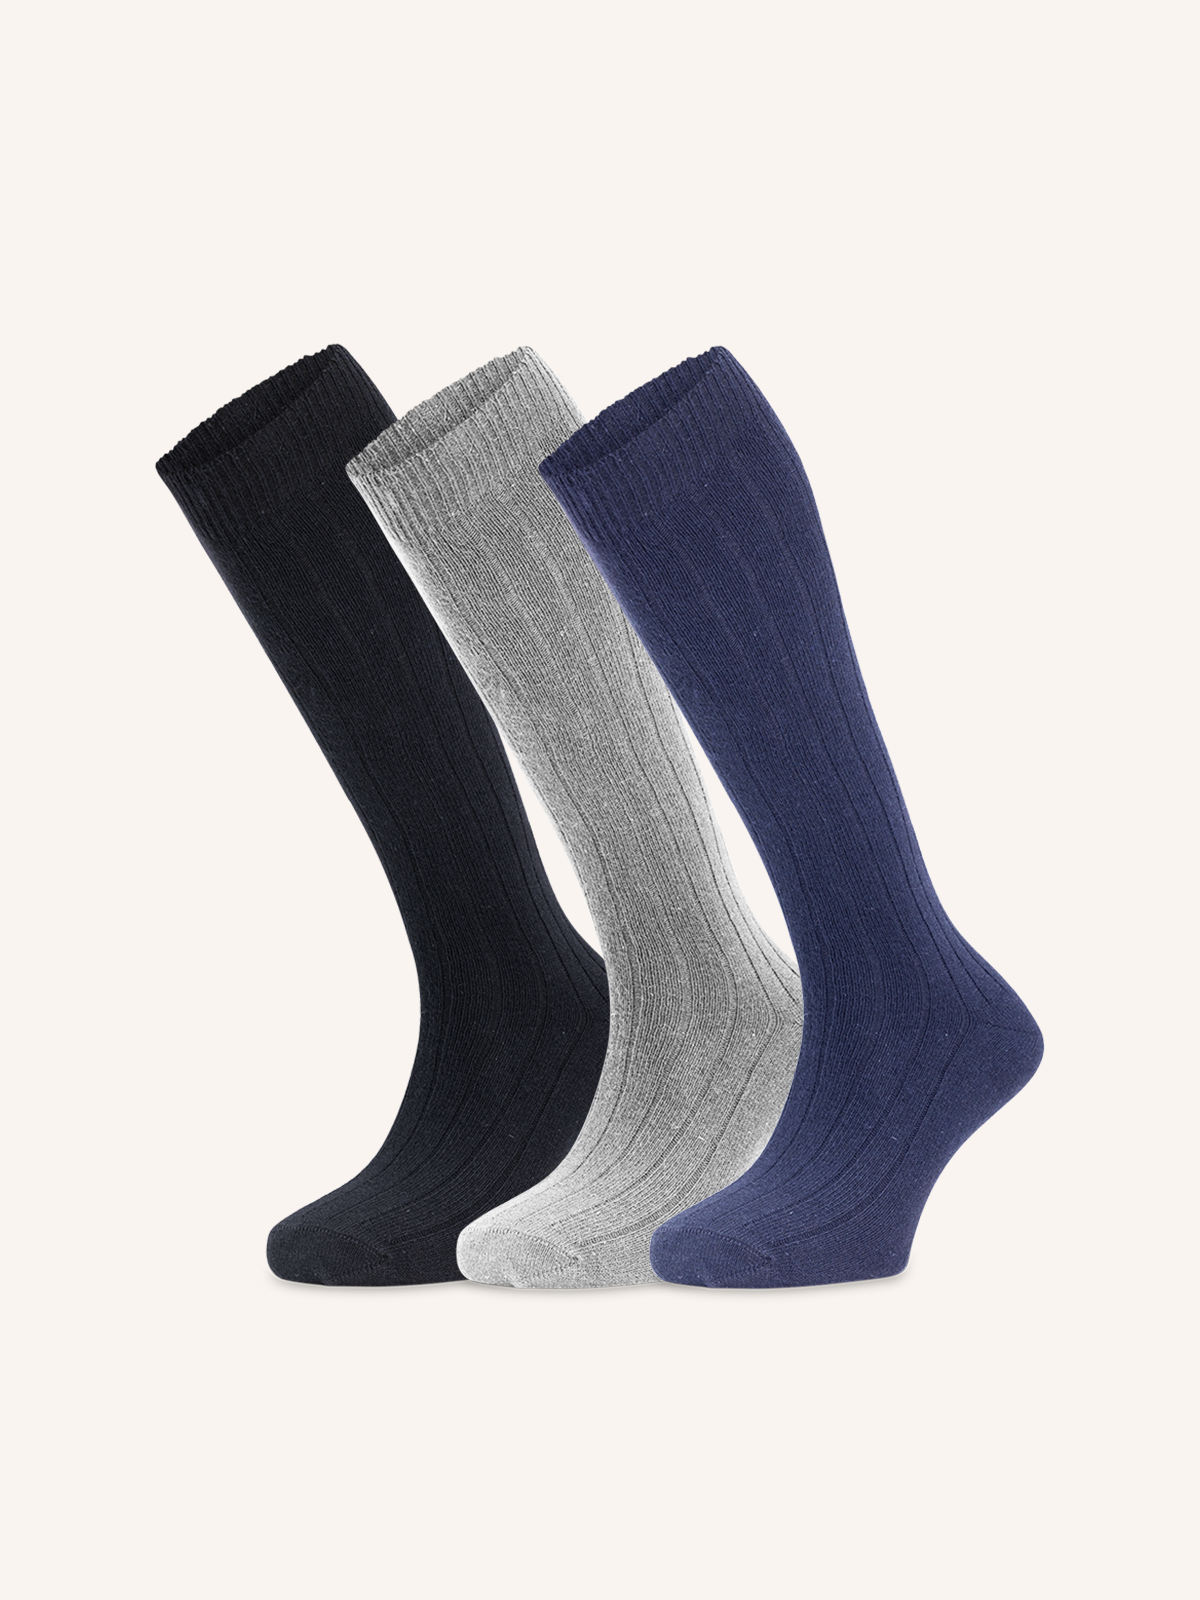 Long Ribbed Sock in Angora, Cotton and Viscose for Men | Plain Color | Pack of 3 Pairs | Blond L